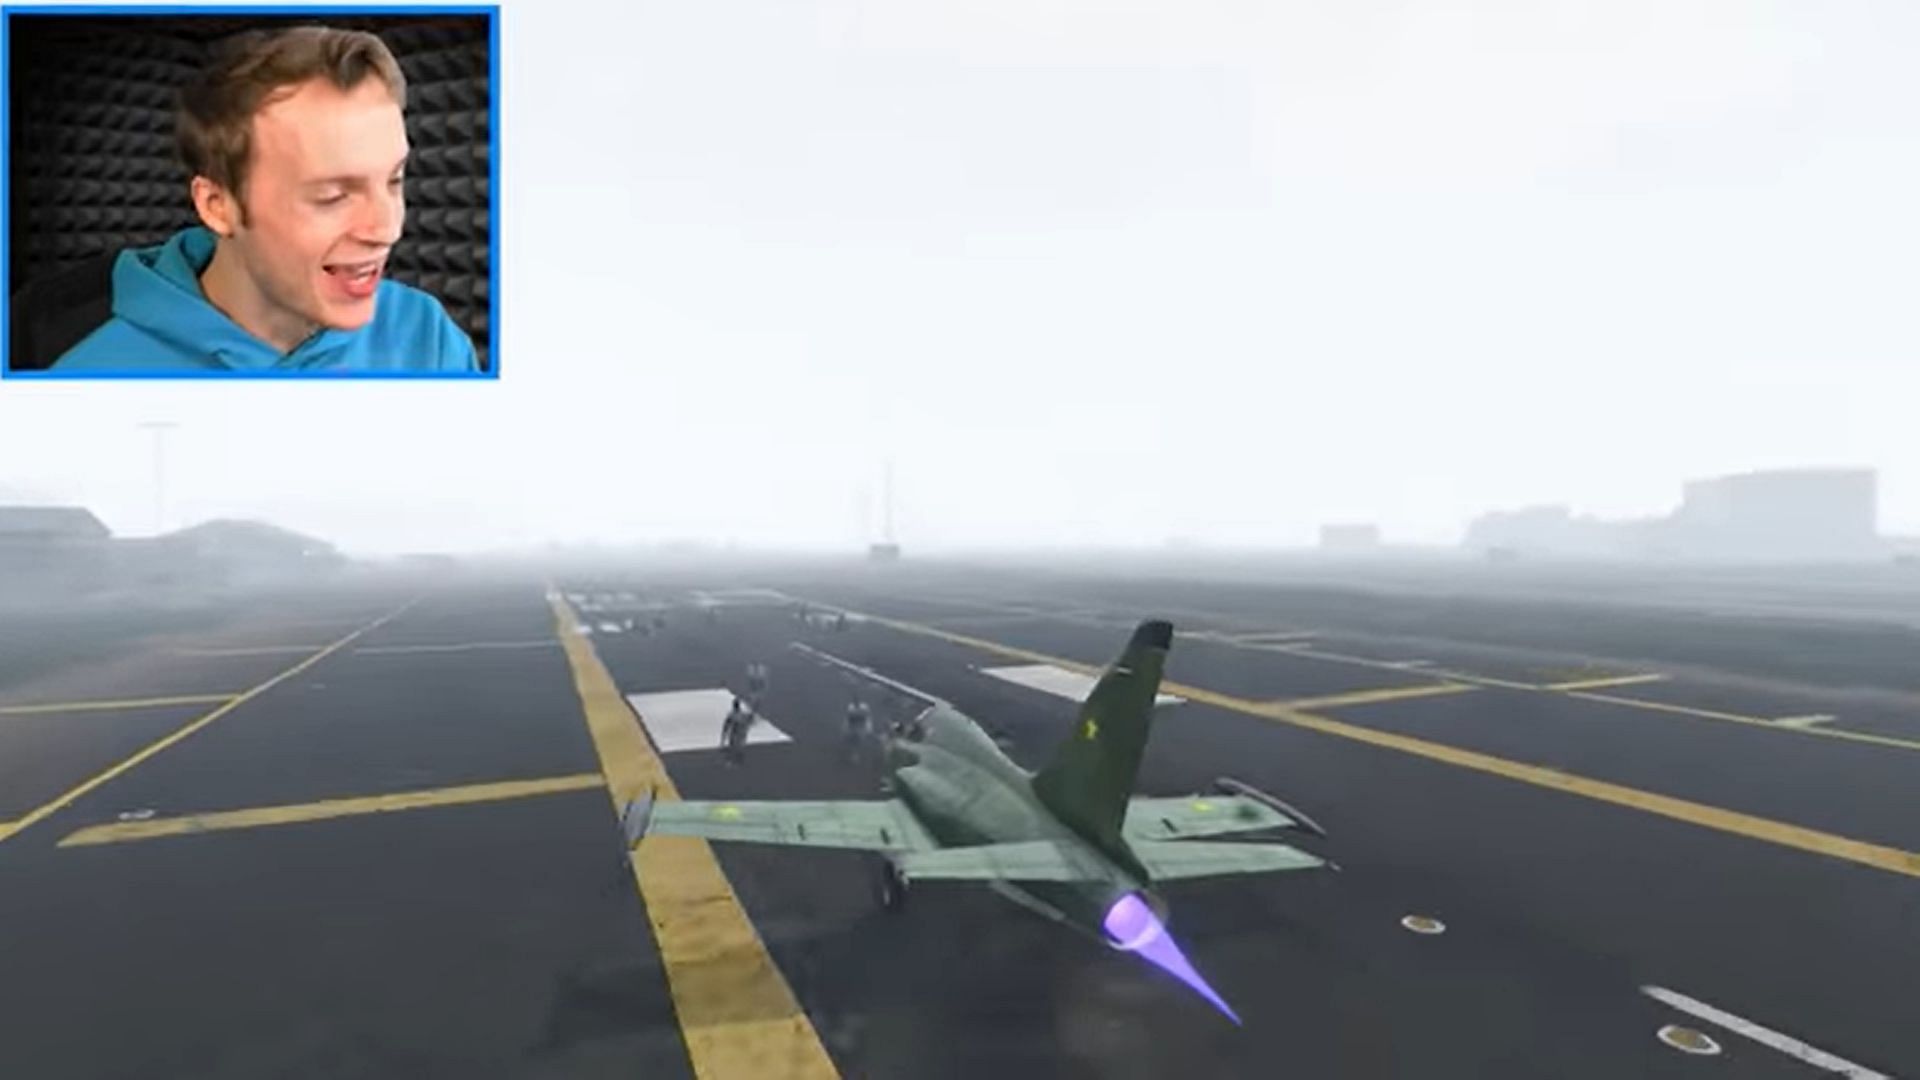 Nought runs over some zombies in a military jet (Image via Sprotskeeda)